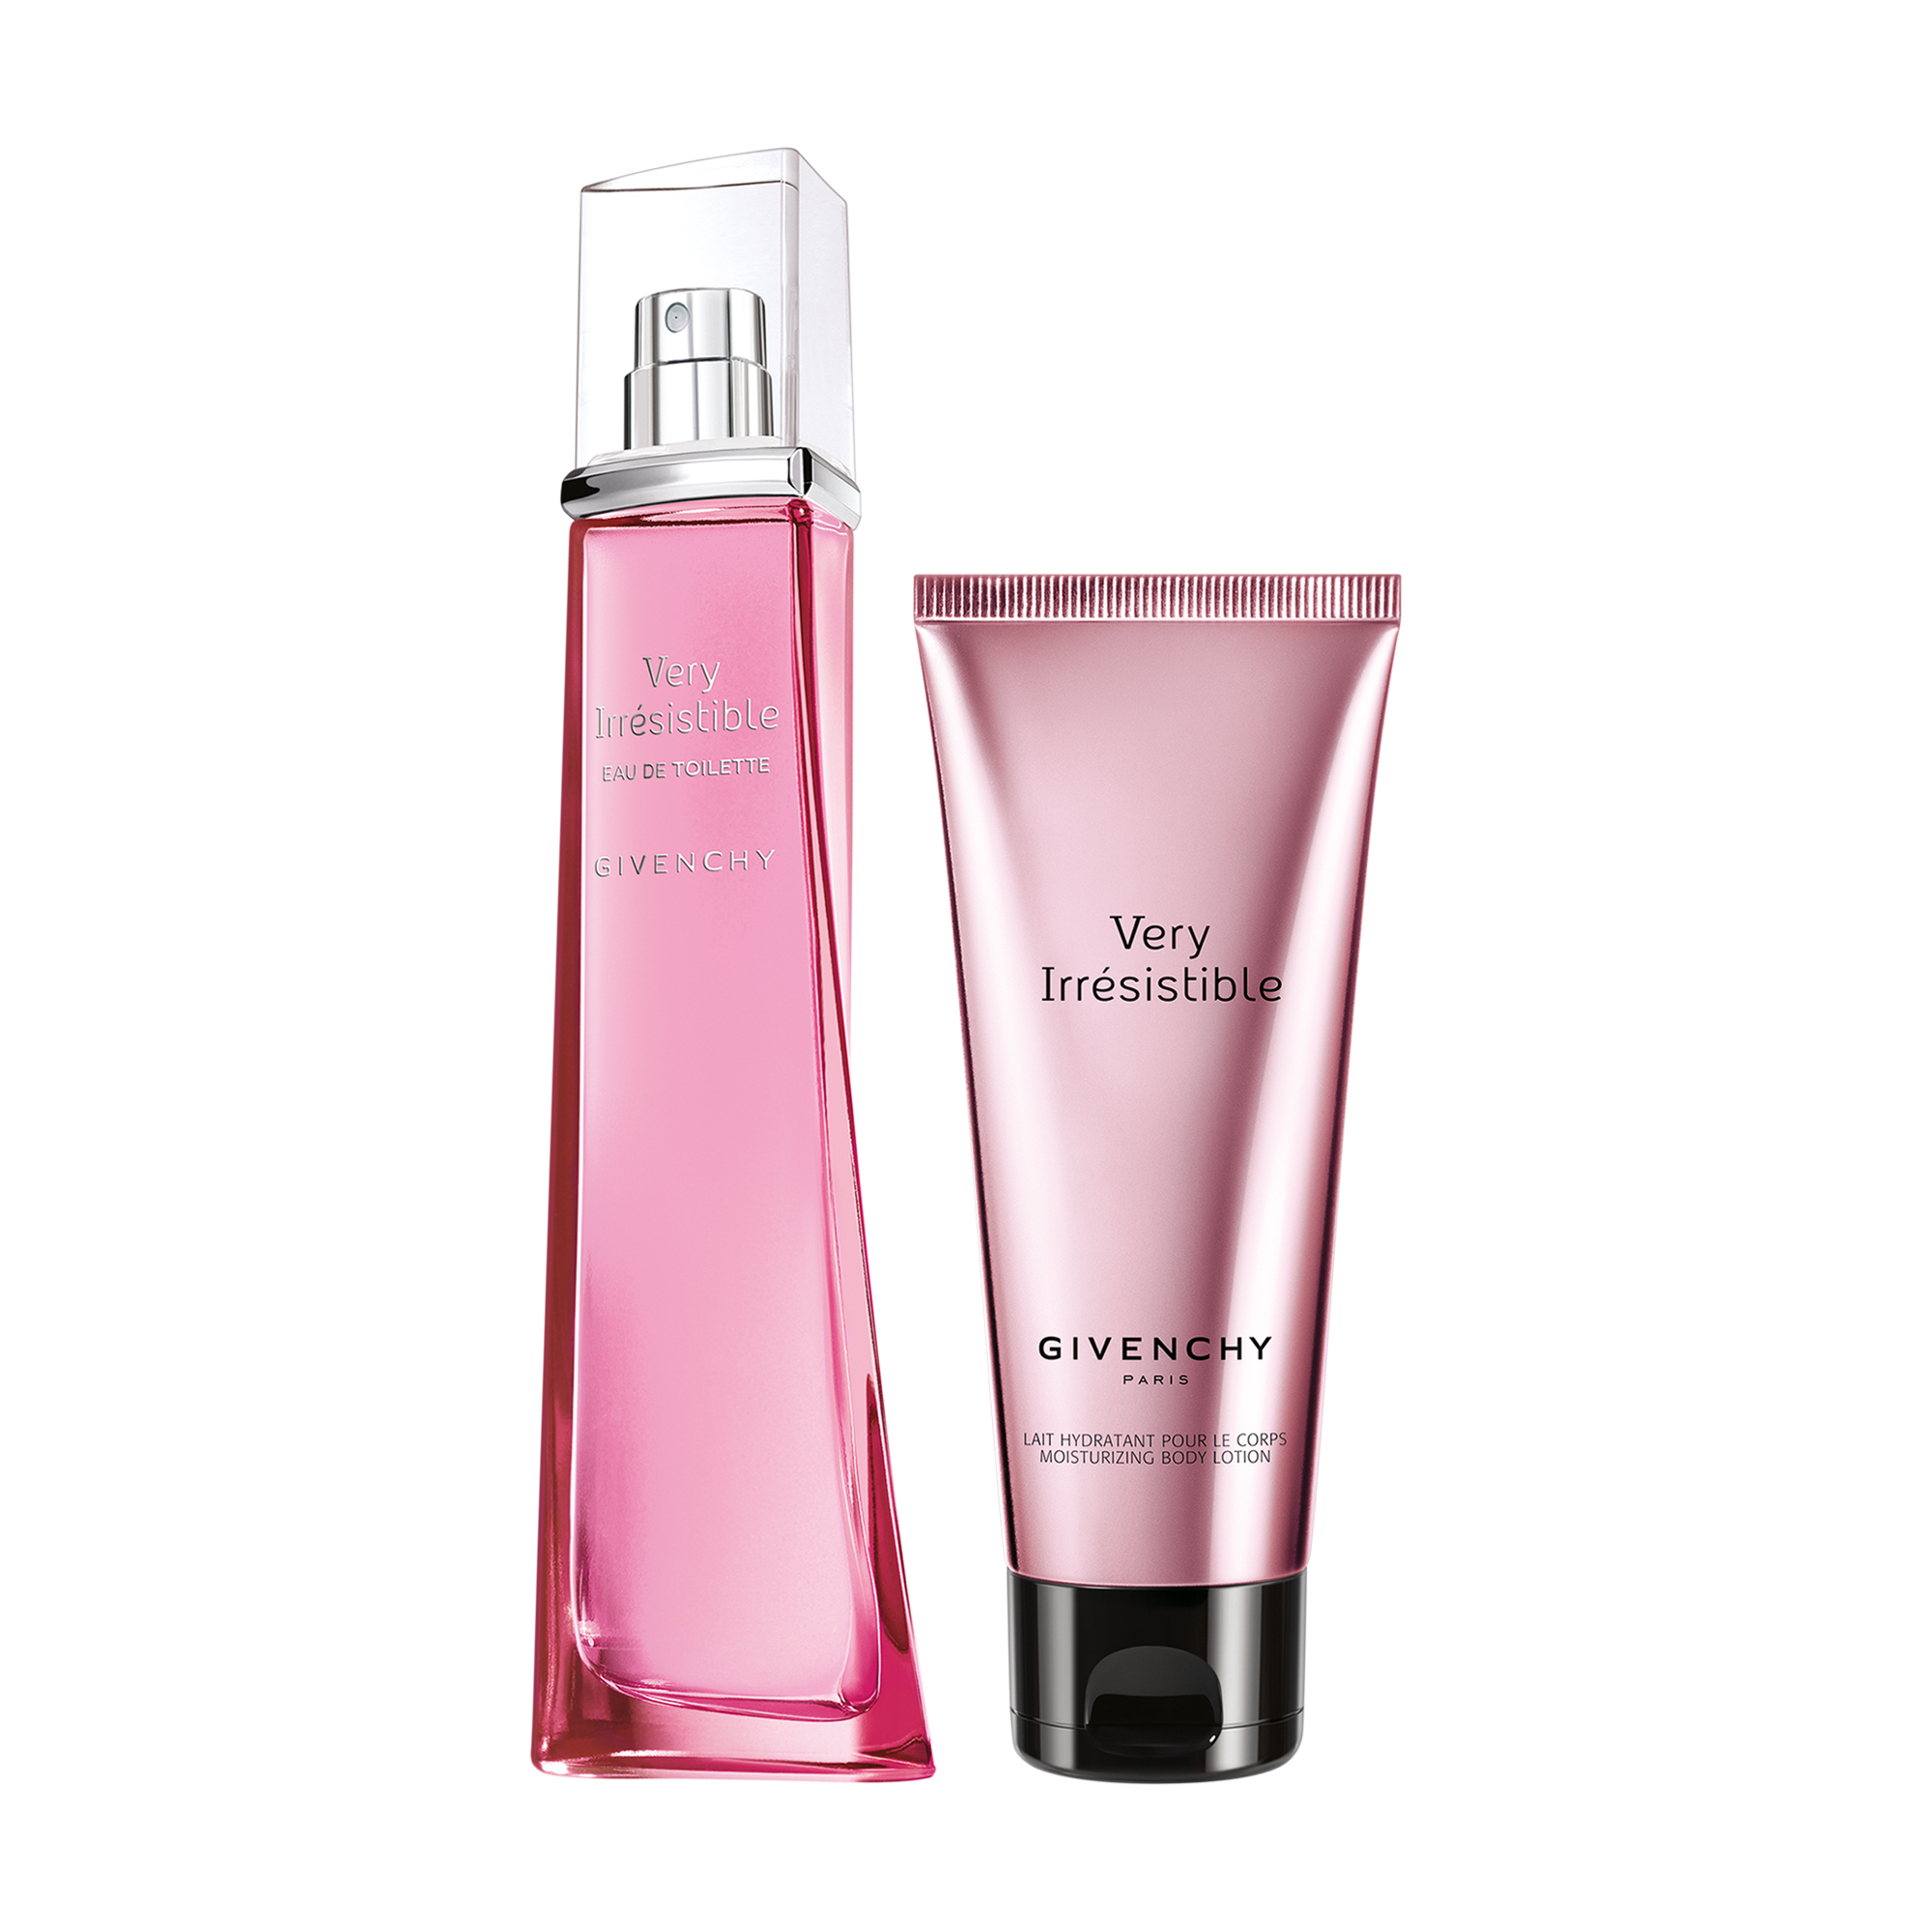 Givenchy irresistible toilette. Givenchy very irresistible Eau de Toilette. Givenchy very irresistible Eau de Toilette 50 ml. Givenchy very irresistible. Givenchy irresistible Eau.